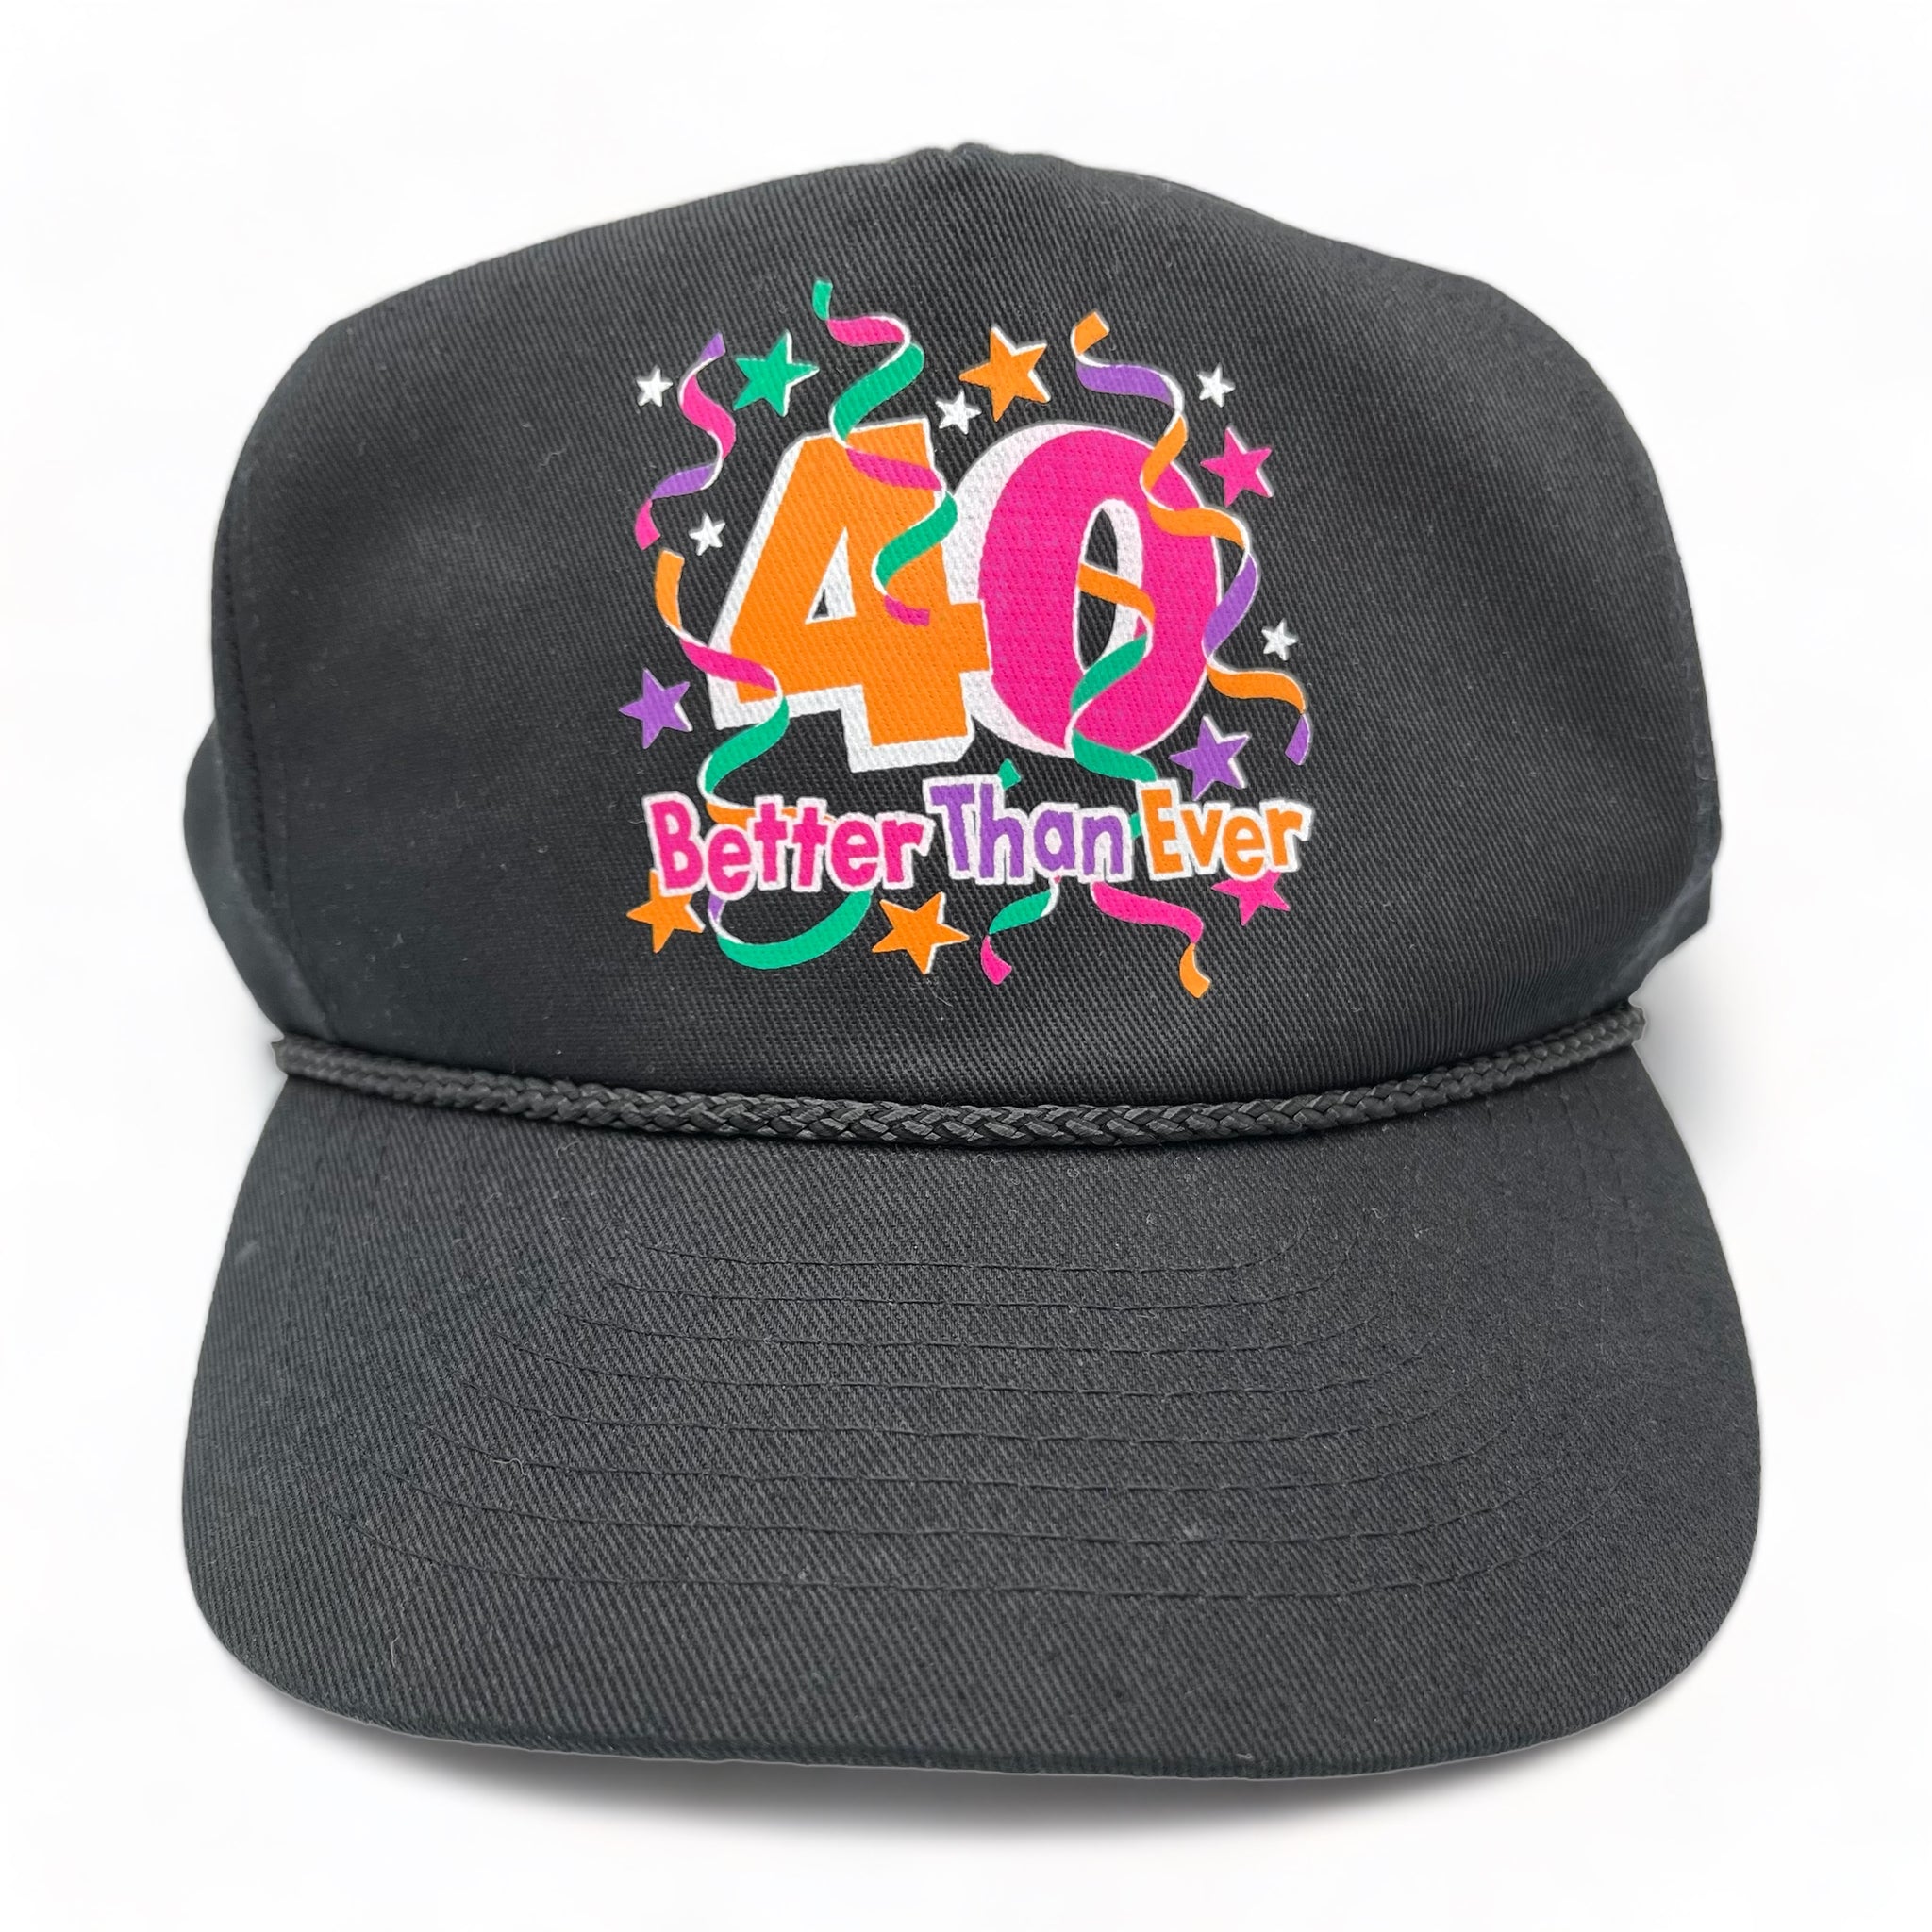 40 Better Than Ever Snapback Hat